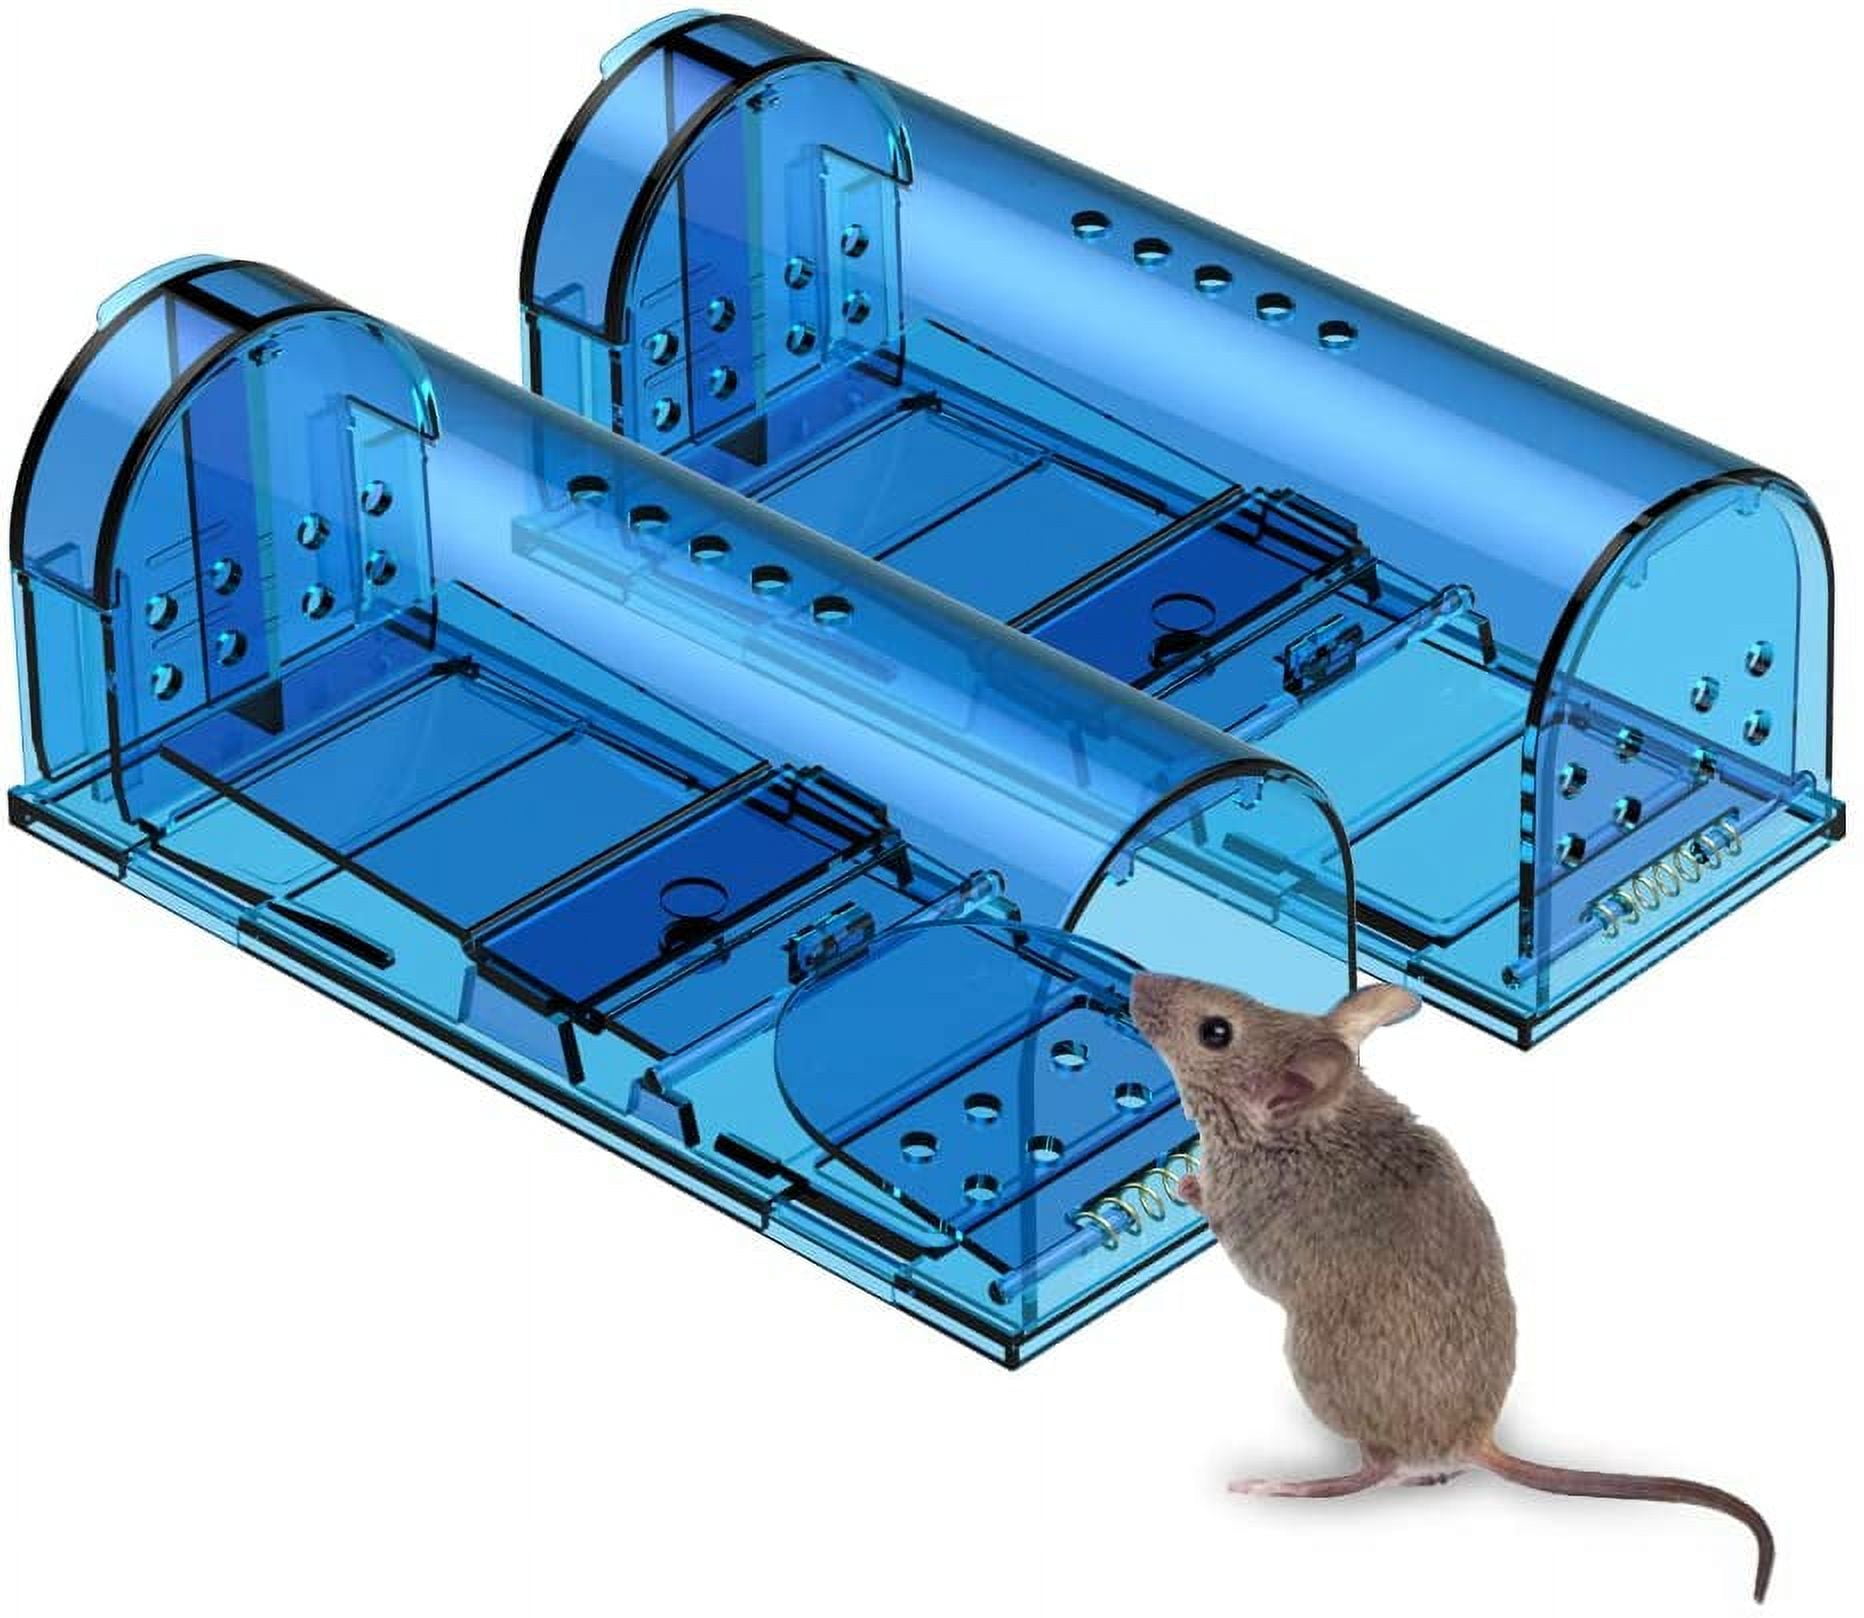 Best Humane Mouse Traps 2018 — Tips for Humane Mouse Traps